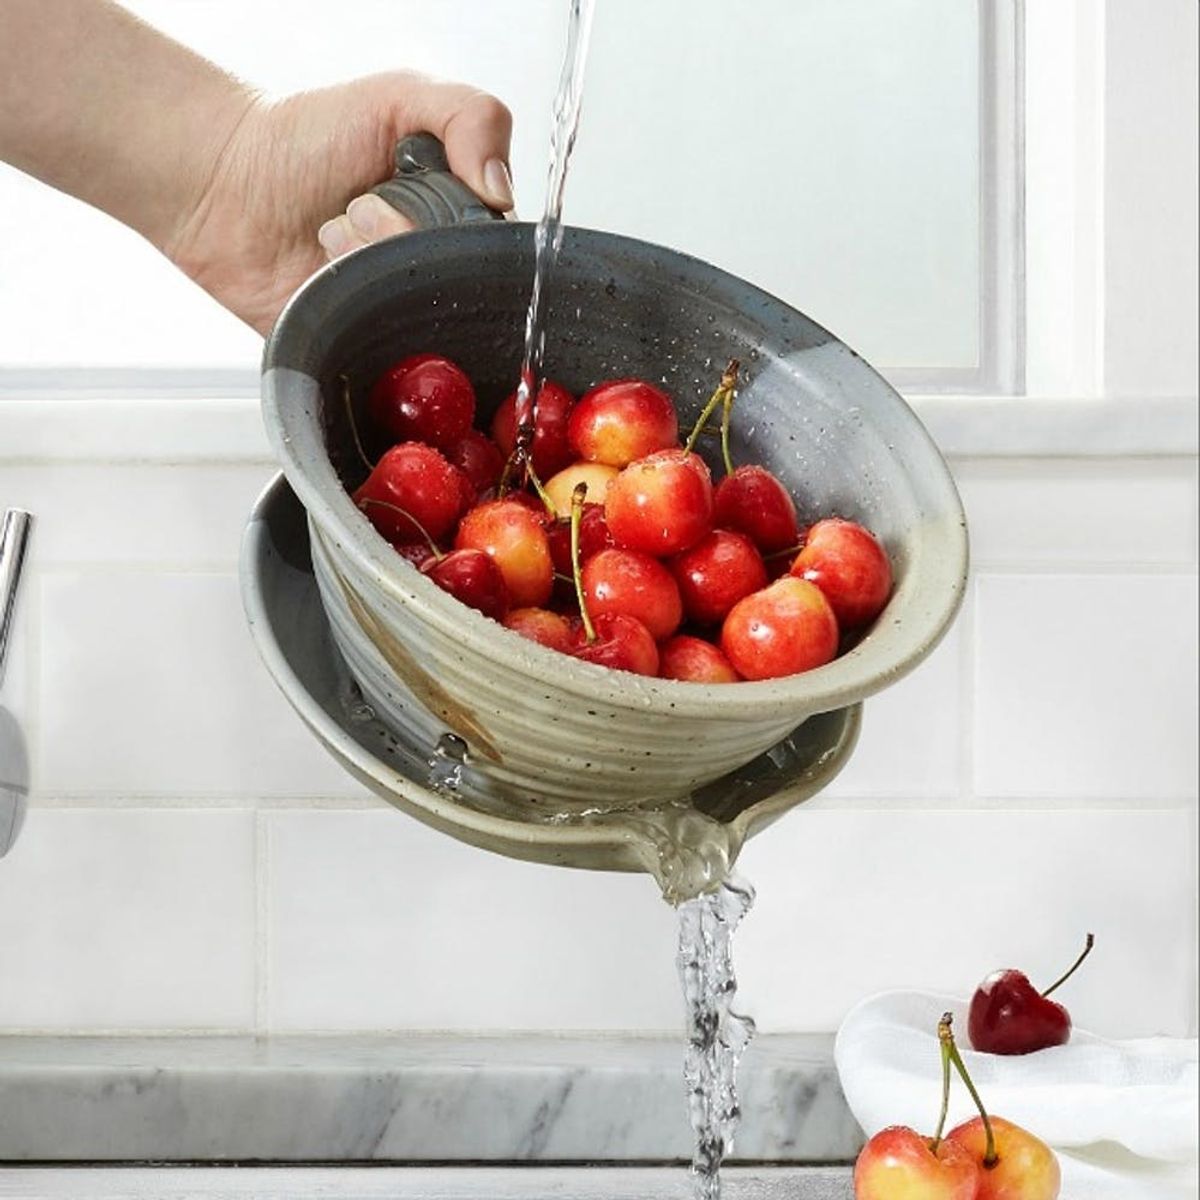 15 Kitchen Gadgets That Make Cooking With Seasonal Produce Easy